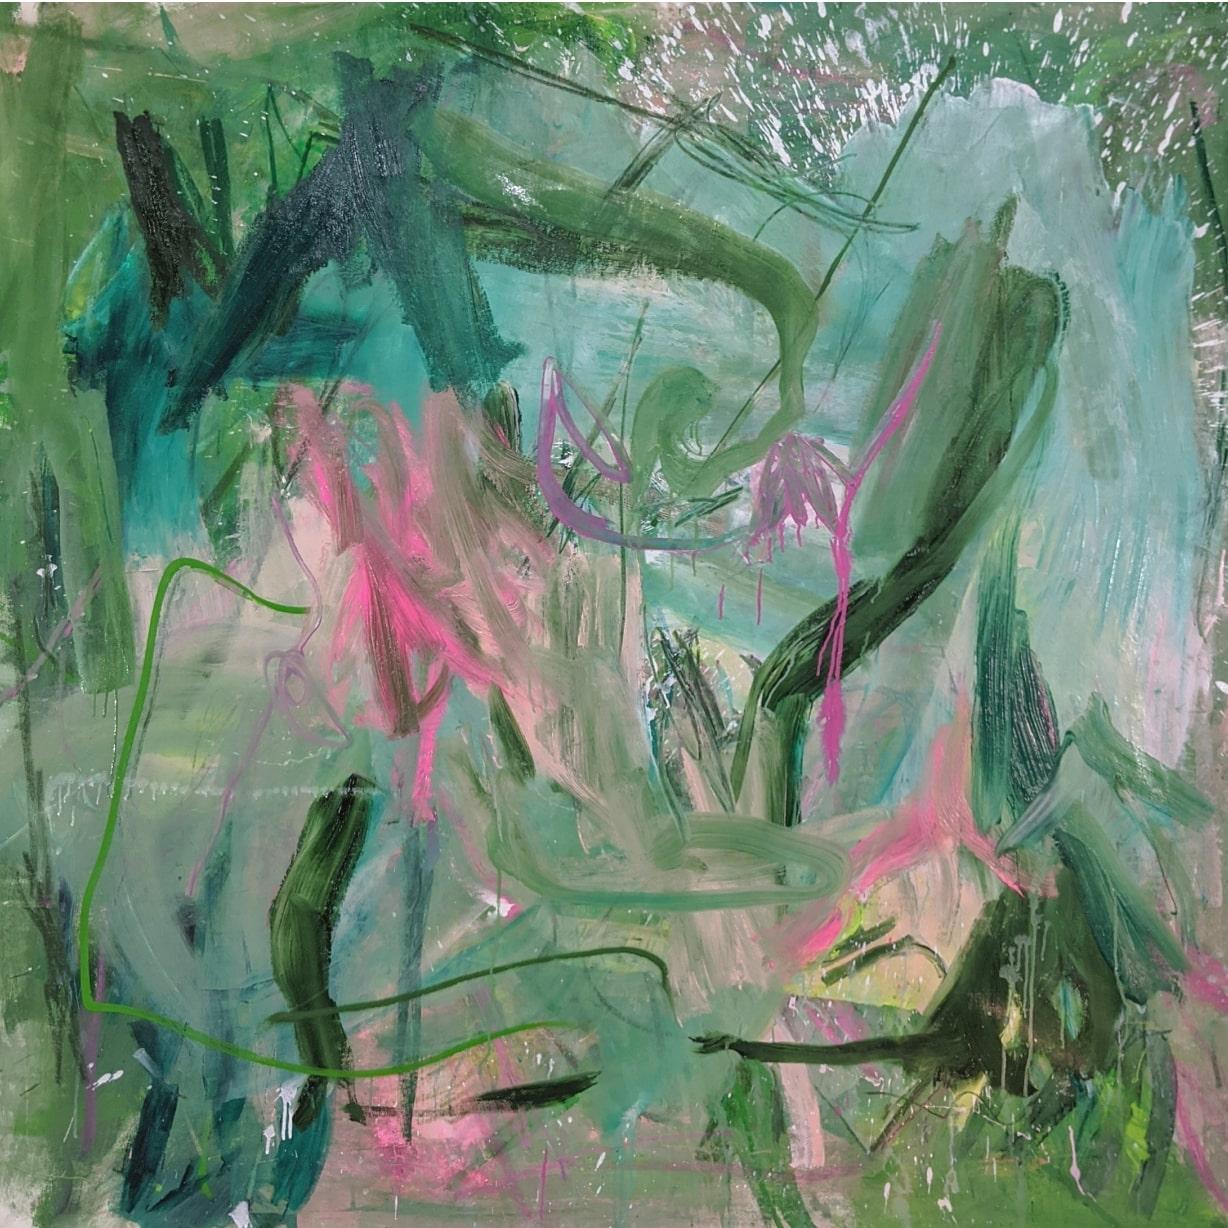 "Mirage"

Abstract painting by artist Joseph Conrad Ferm. Different tones of greens and white drip splashes with subtle pink strokes.

See our shipping policies. For quotes, please contact us. 

All sales are final.

Born 1975, and raised in New